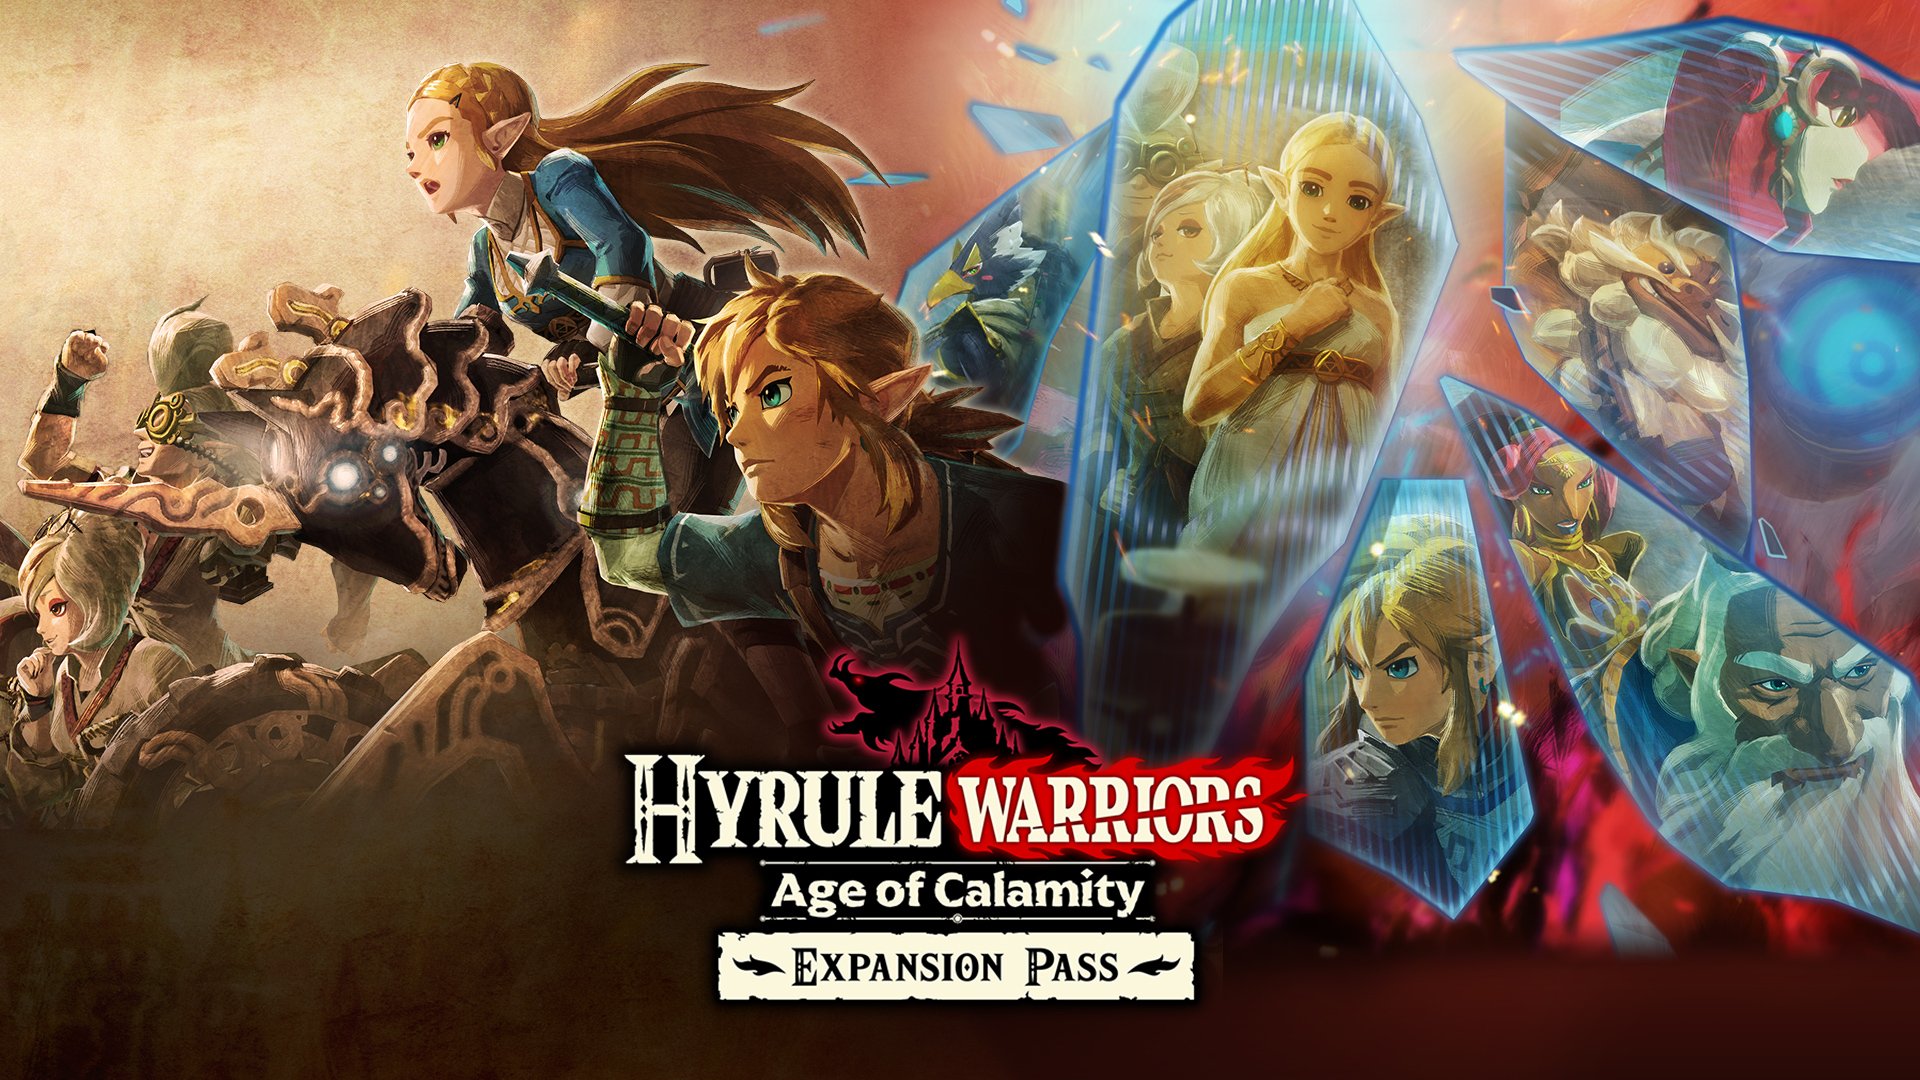 DLC Guide: Is the Expansion Pass Worth It?